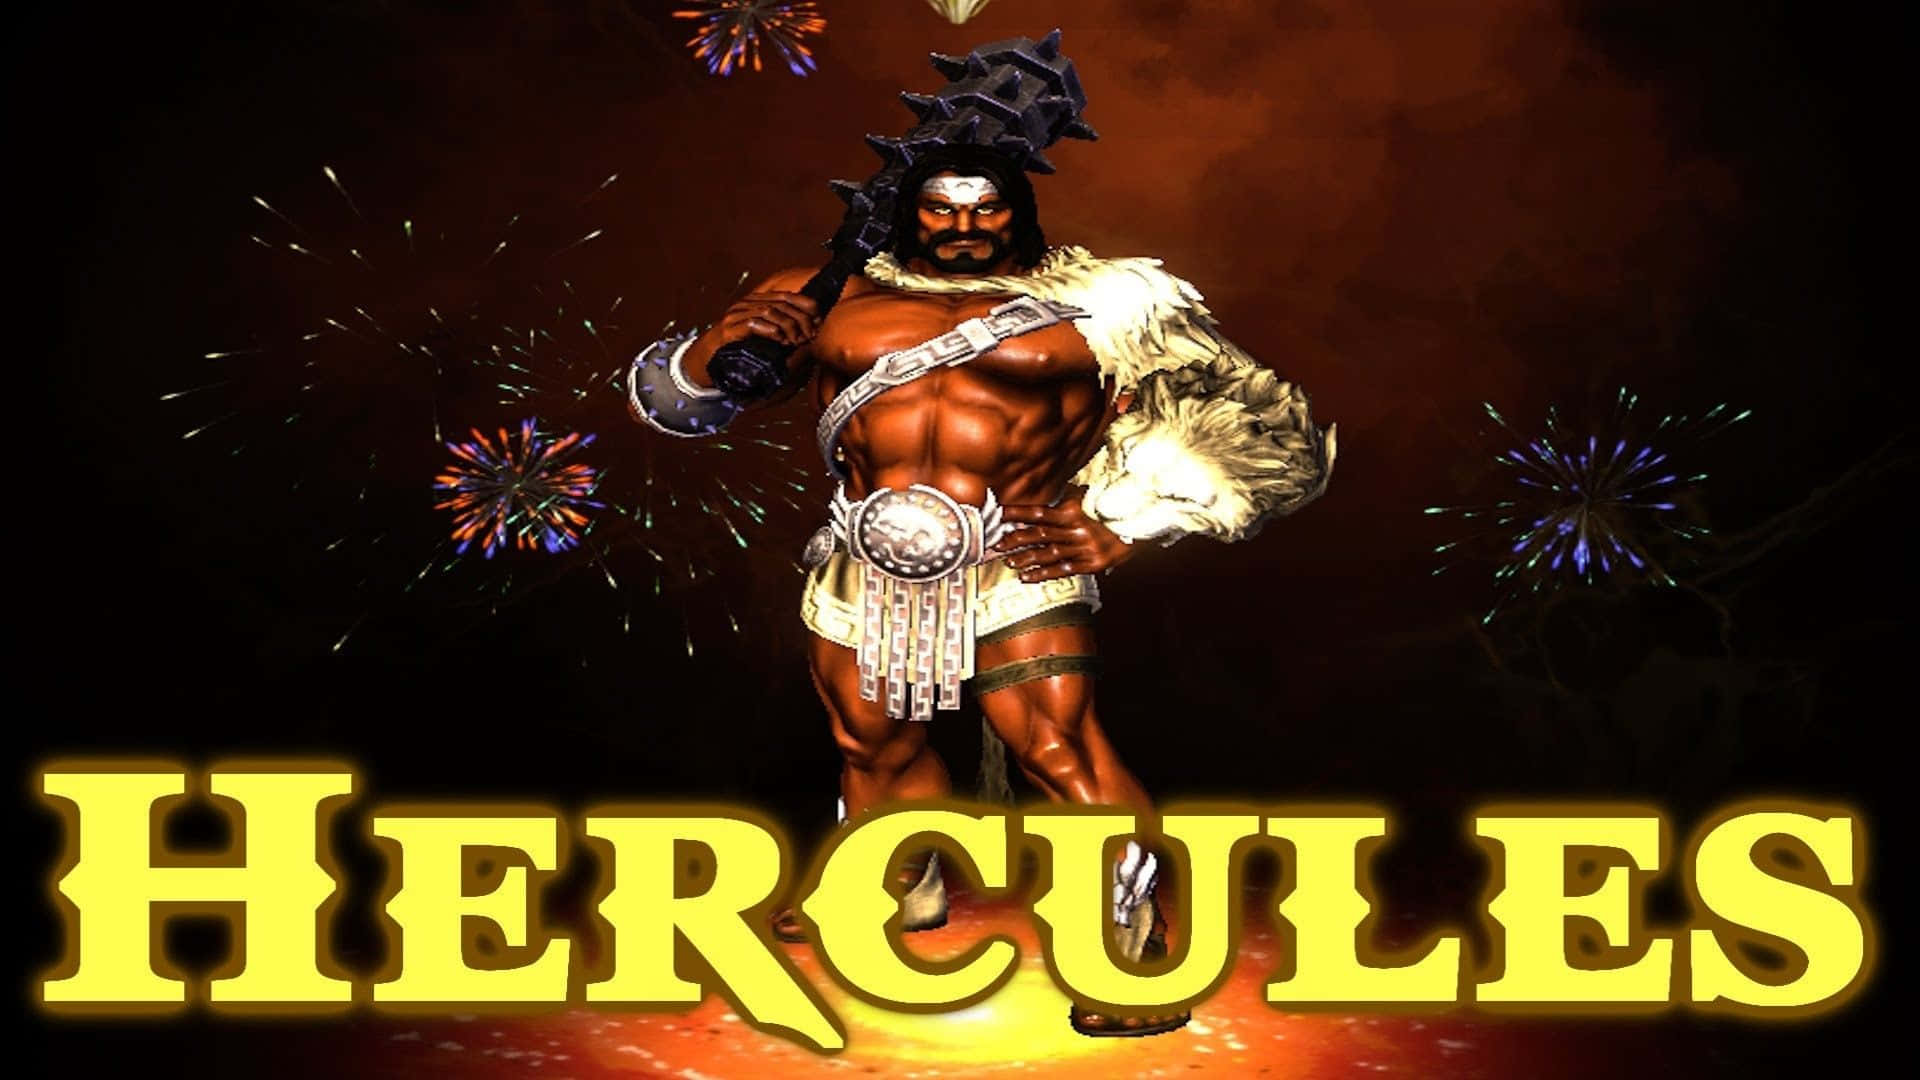 Hercules - A Game With A Man In A Costume